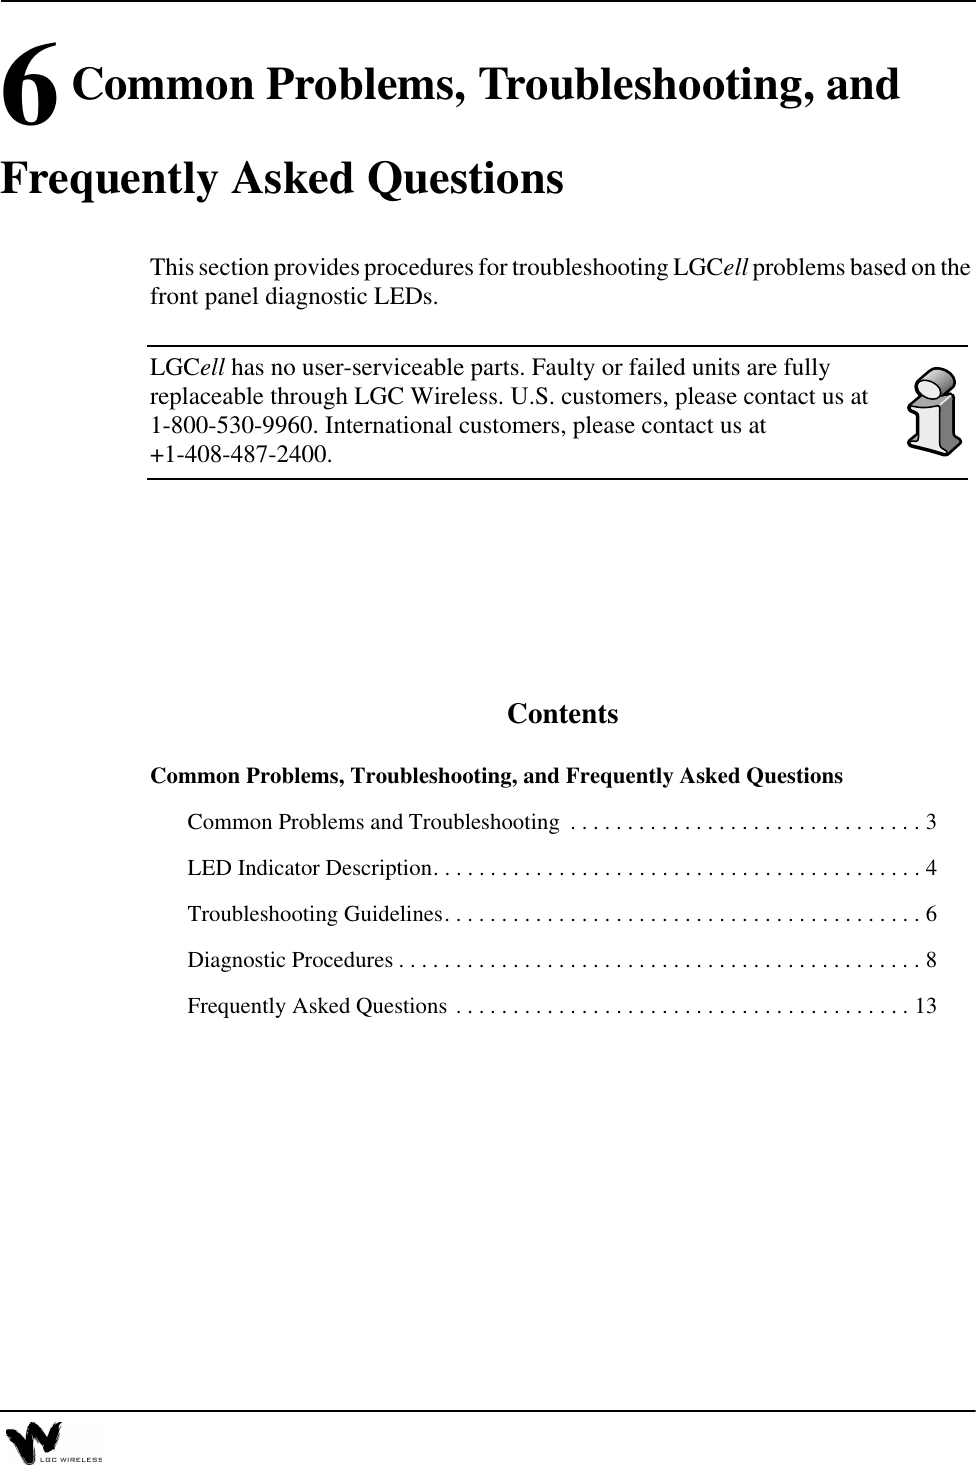 6 Common Problems, Troubleshooting, and Frequently Asked QuestionsThis section provides procedures for troubleshooting LGCell problems based on the front panel diagnostic LEDs. LGCell has no user-serviceable parts. Faulty or failed units are fully replaceable through LGC Wireless. U.S. customers, please contact us at 1-800-530-9960. International customers, please contact us at +1-408-487-2400.ContentsCommon Problems, Troubleshooting, and Frequently Asked QuestionsCommon Problems and Troubleshooting  . . . . . . . . . . . . . . . . . . . . . . . . . . . . . . . 3LED Indicator Description. . . . . . . . . . . . . . . . . . . . . . . . . . . . . . . . . . . . . . . . . . . 4Troubleshooting Guidelines. . . . . . . . . . . . . . . . . . . . . . . . . . . . . . . . . . . . . . . . . . 6Diagnostic Procedures . . . . . . . . . . . . . . . . . . . . . . . . . . . . . . . . . . . . . . . . . . . . . . 8Frequently Asked Questions . . . . . . . . . . . . . . . . . . . . . . . . . . . . . . . . . . . . . . . . 13